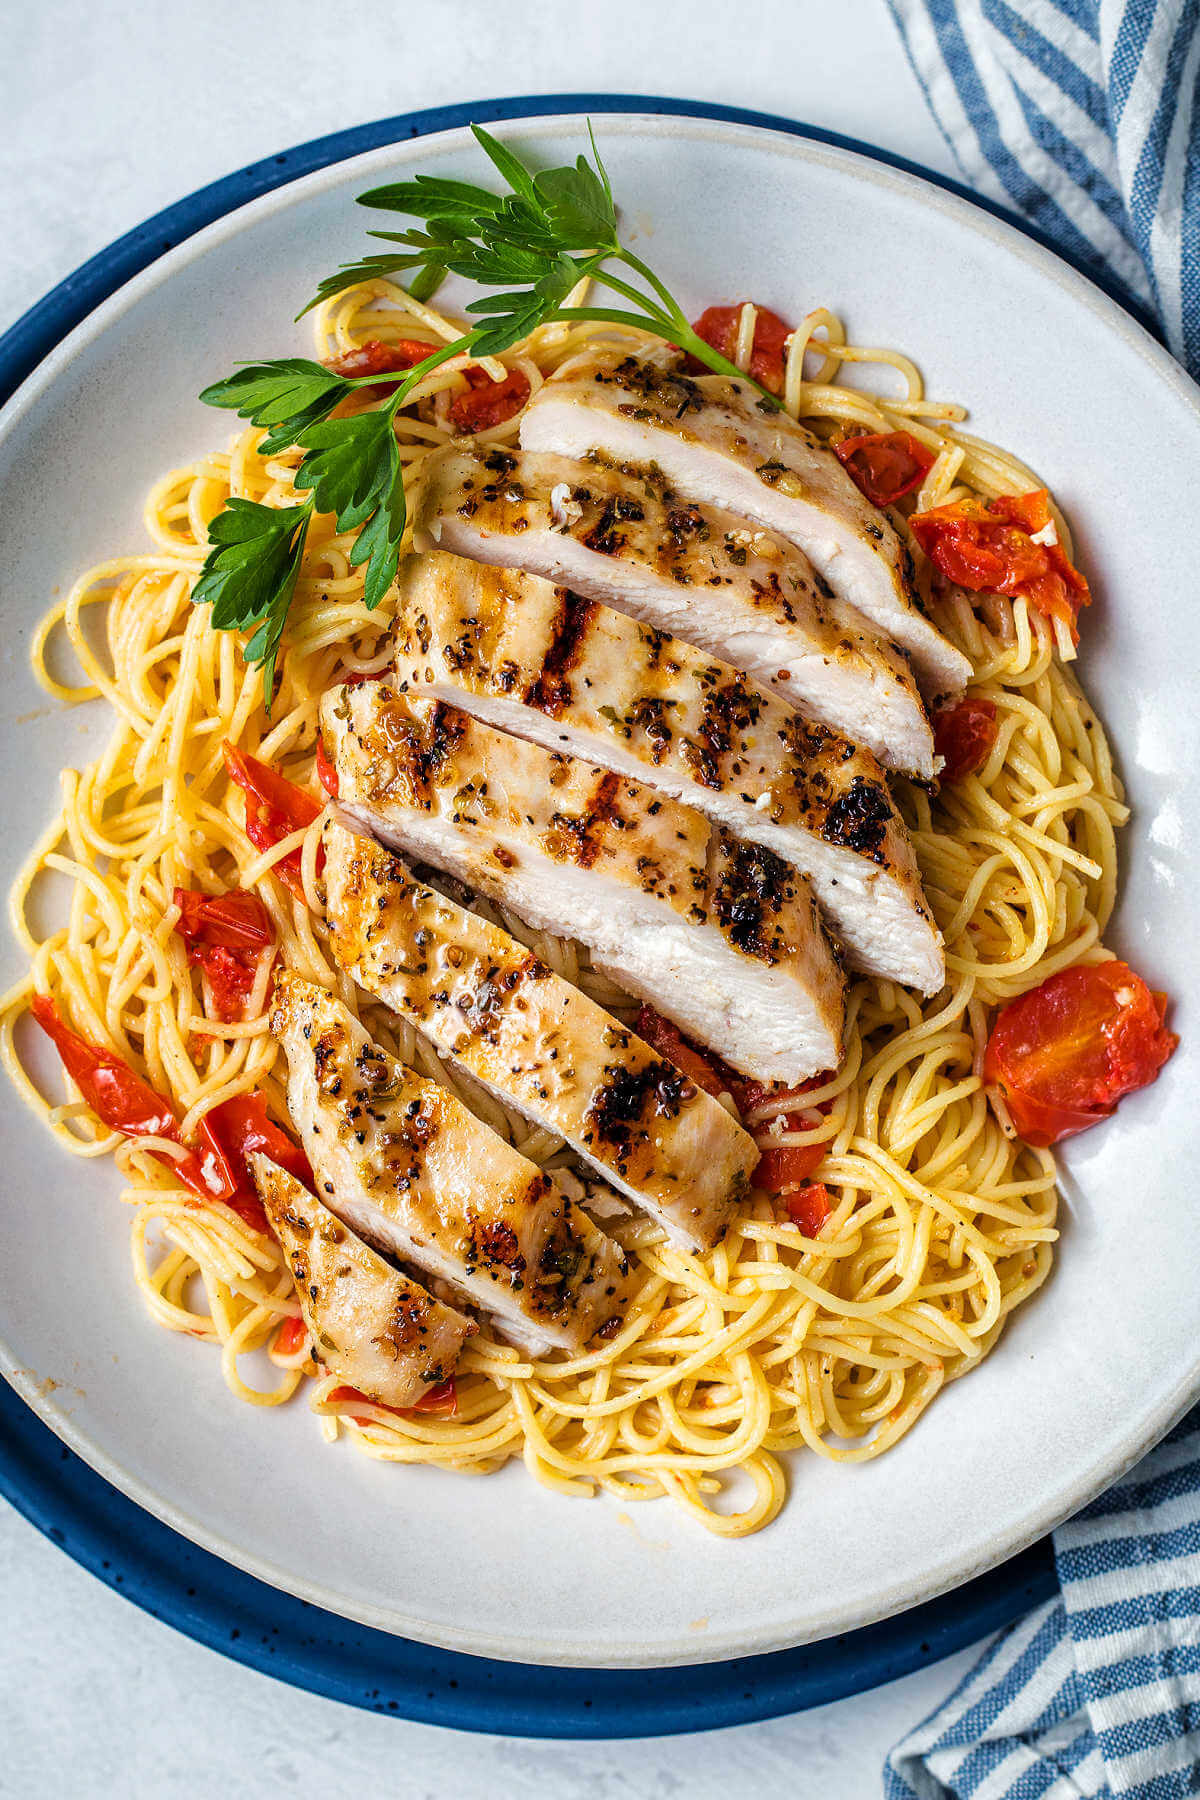 Italian grilled chicken sliced and served on a bed of pasta.